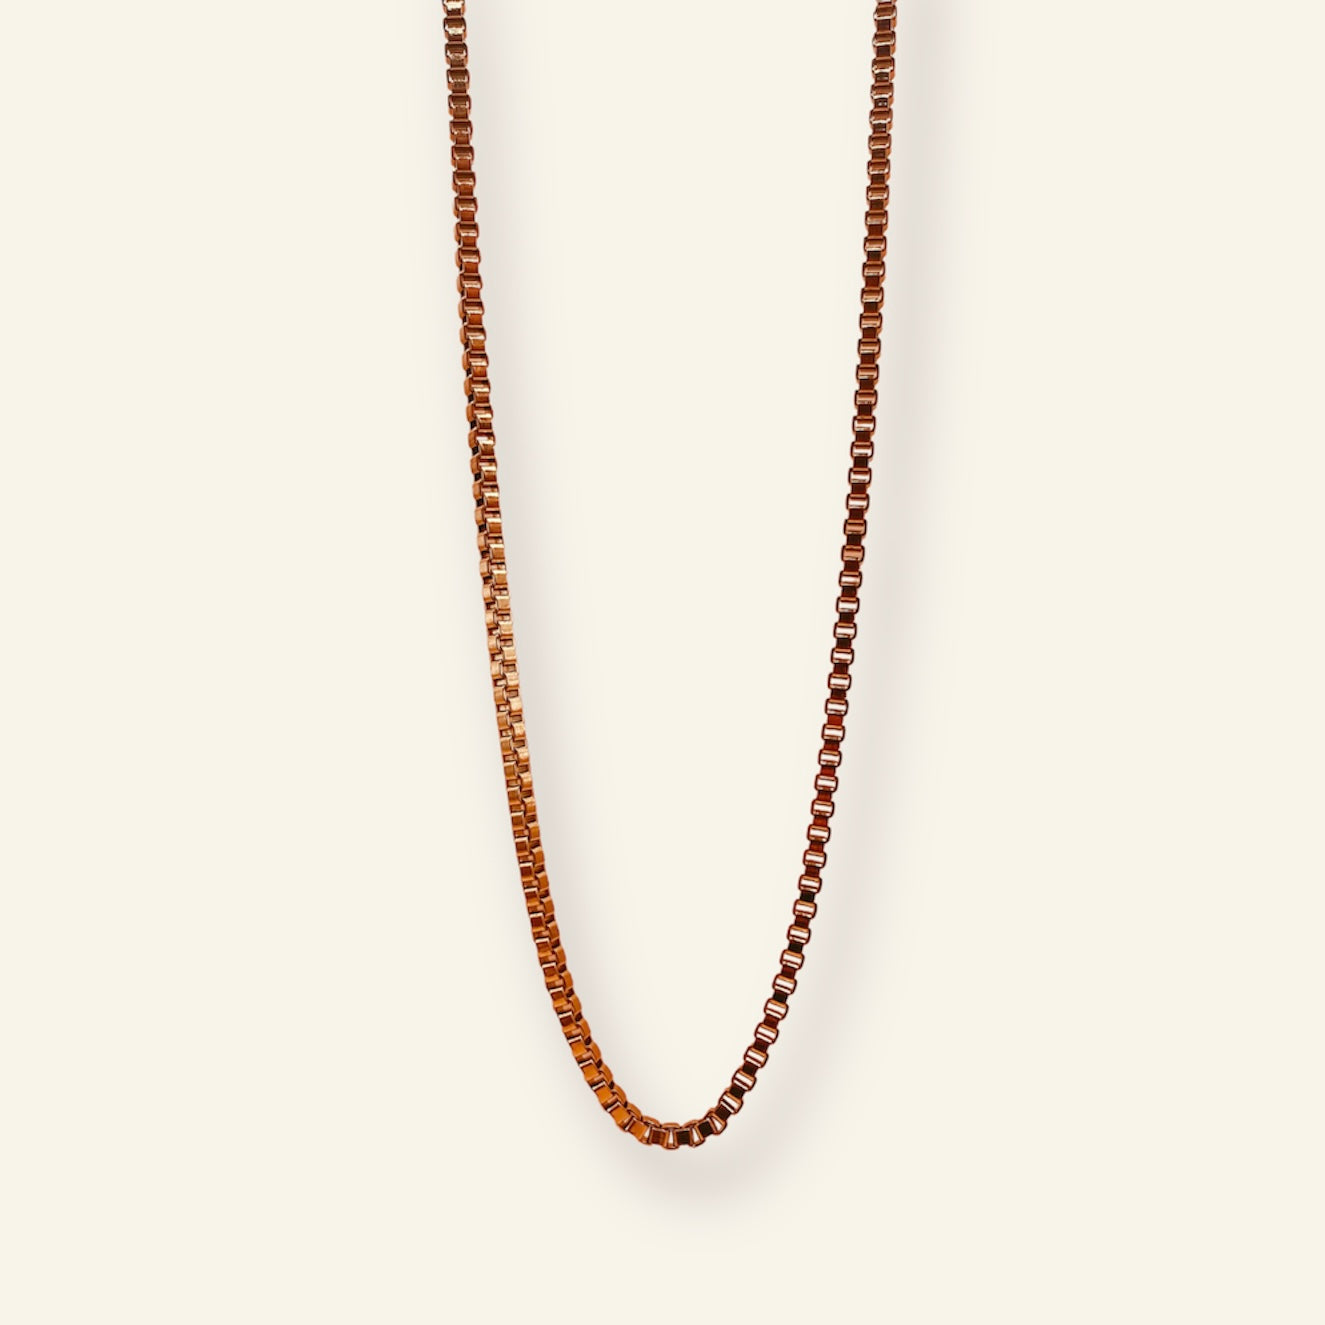 BOX CHAIN 60cm 2mm Stainless Steel Halskette | Necklace Gold